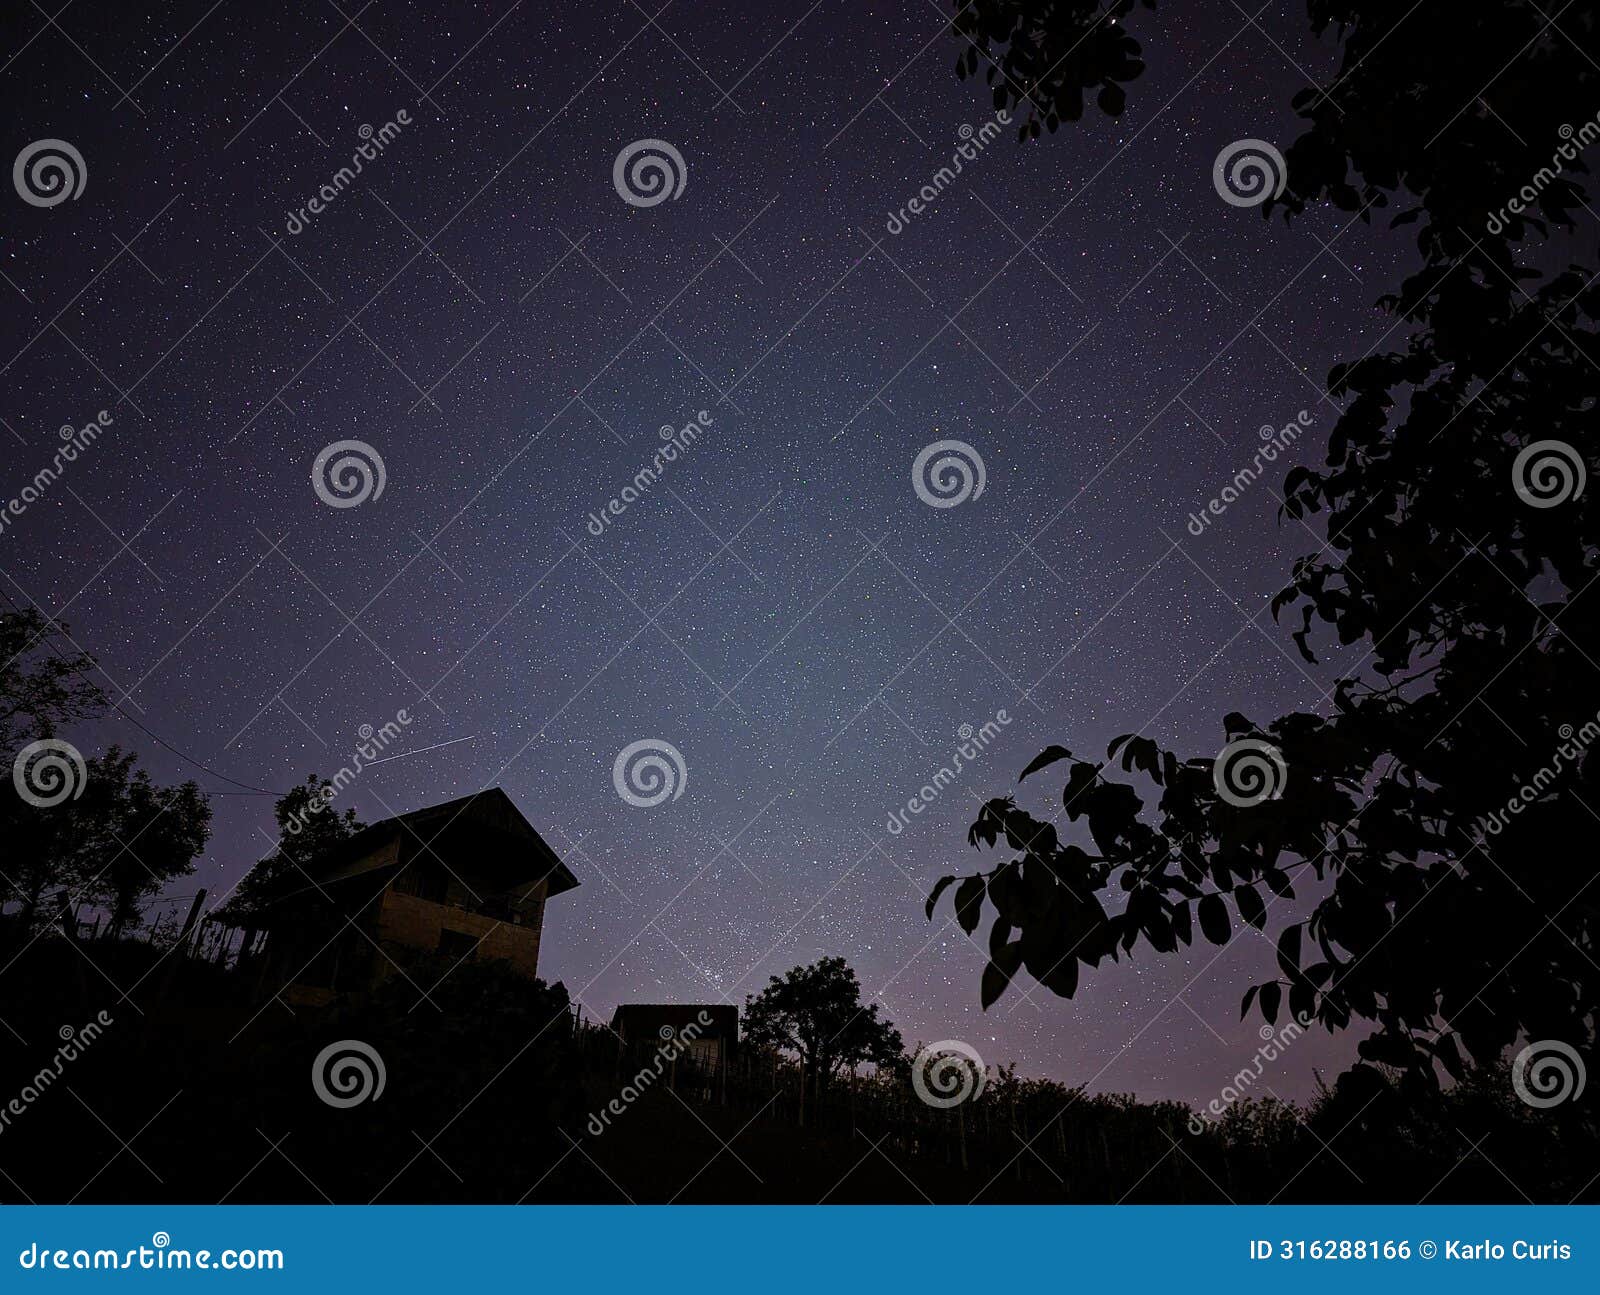 night sky, stars, universe background, astrophotography, cosmos wallpaper, milky way and planets at klenice, croatia